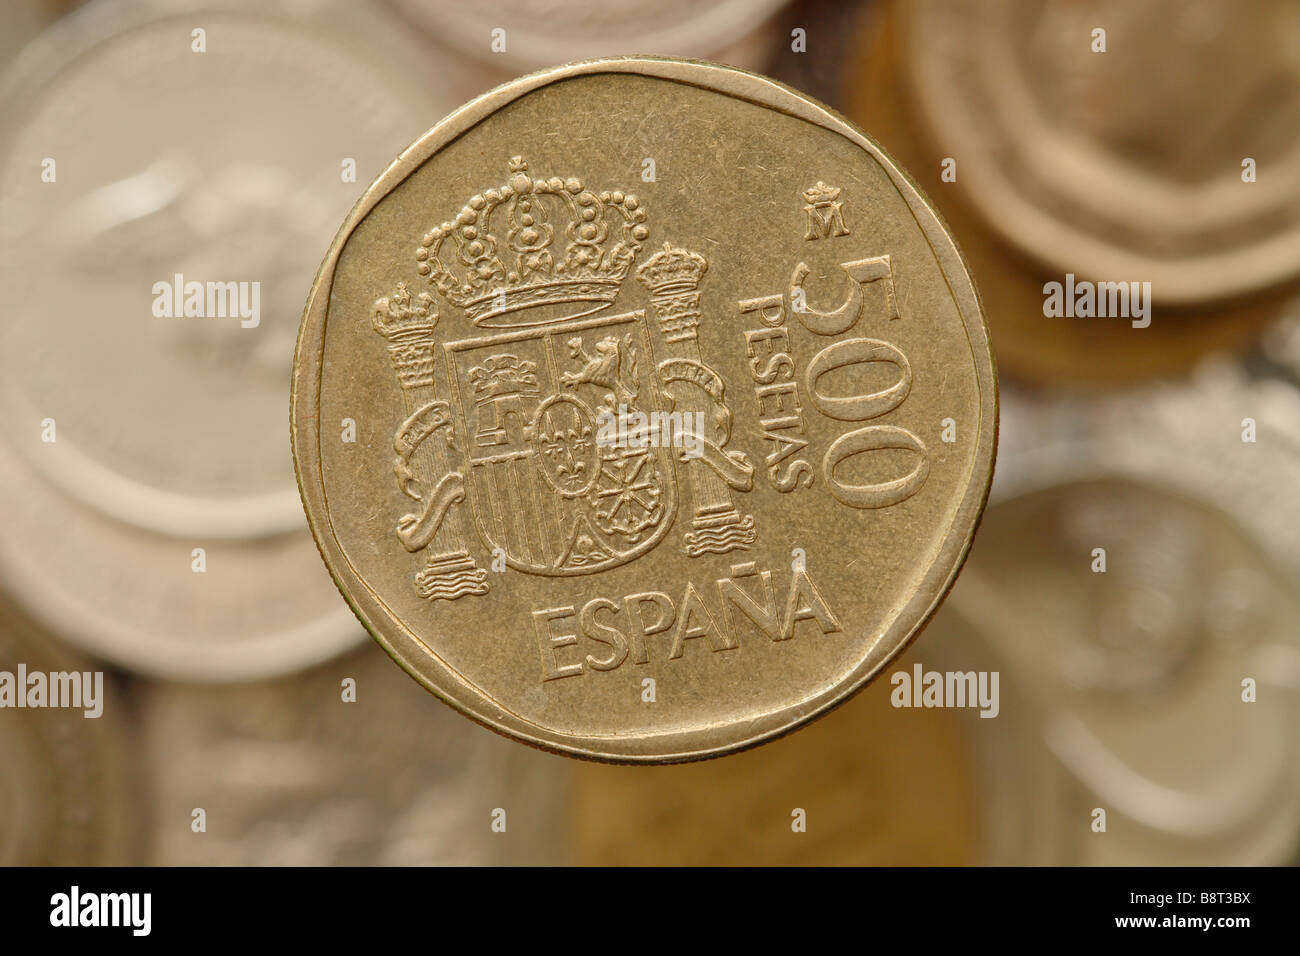 Spain Spanish 500 pesetas coin used in Spain before the introduction of the single currency Stock Photo